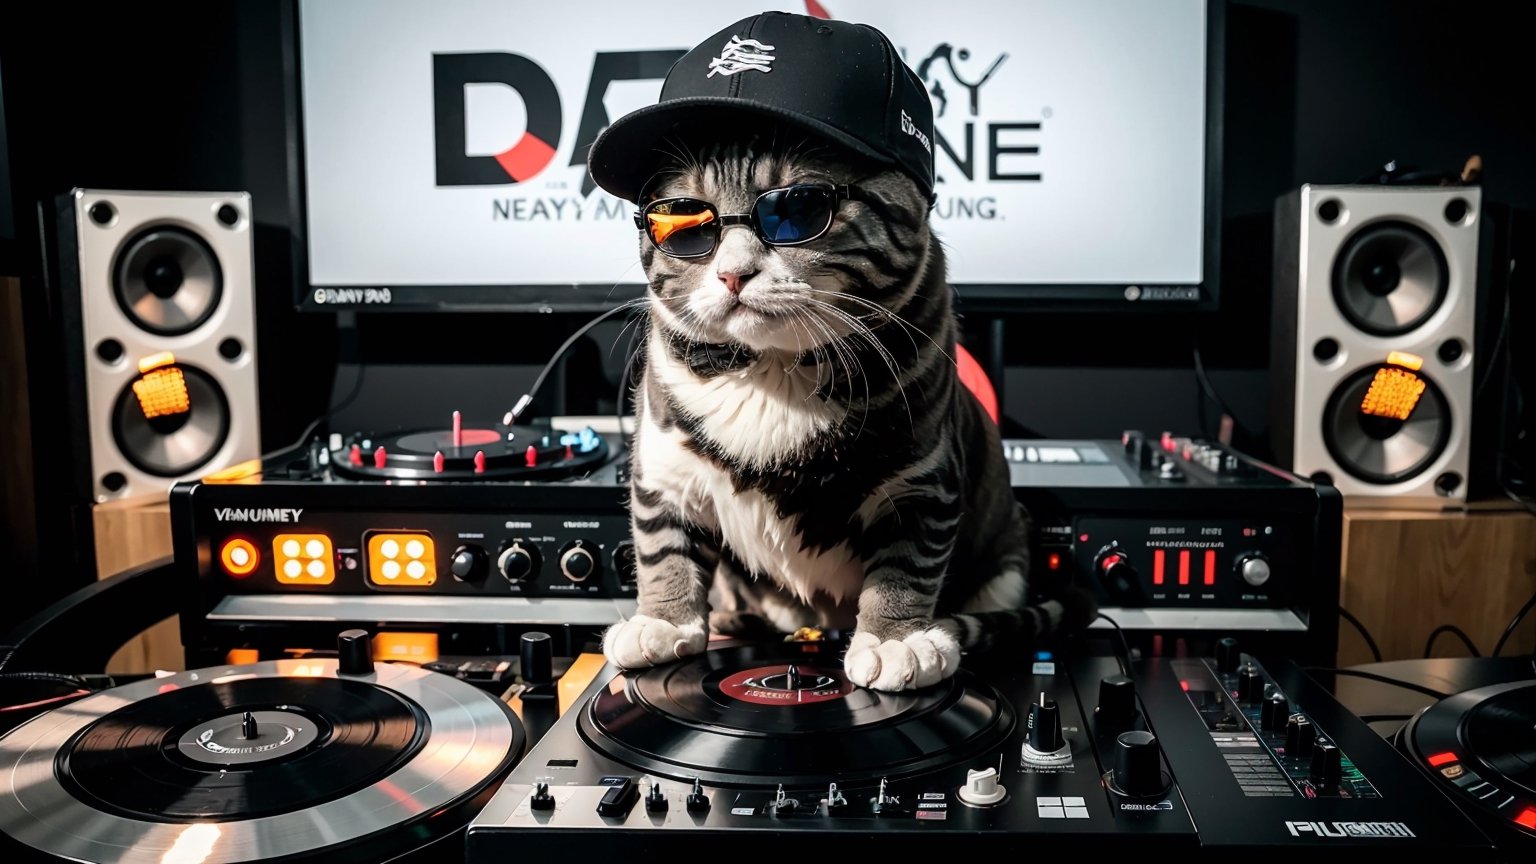 Envision an adorable and playful scene: gray very fluffy cat of the Nibelung breed sits in front of a DJ equipment, remote control and turntables "Pioneer", dressed in sunglasses and black baseball cap, resembling an fashion little princ